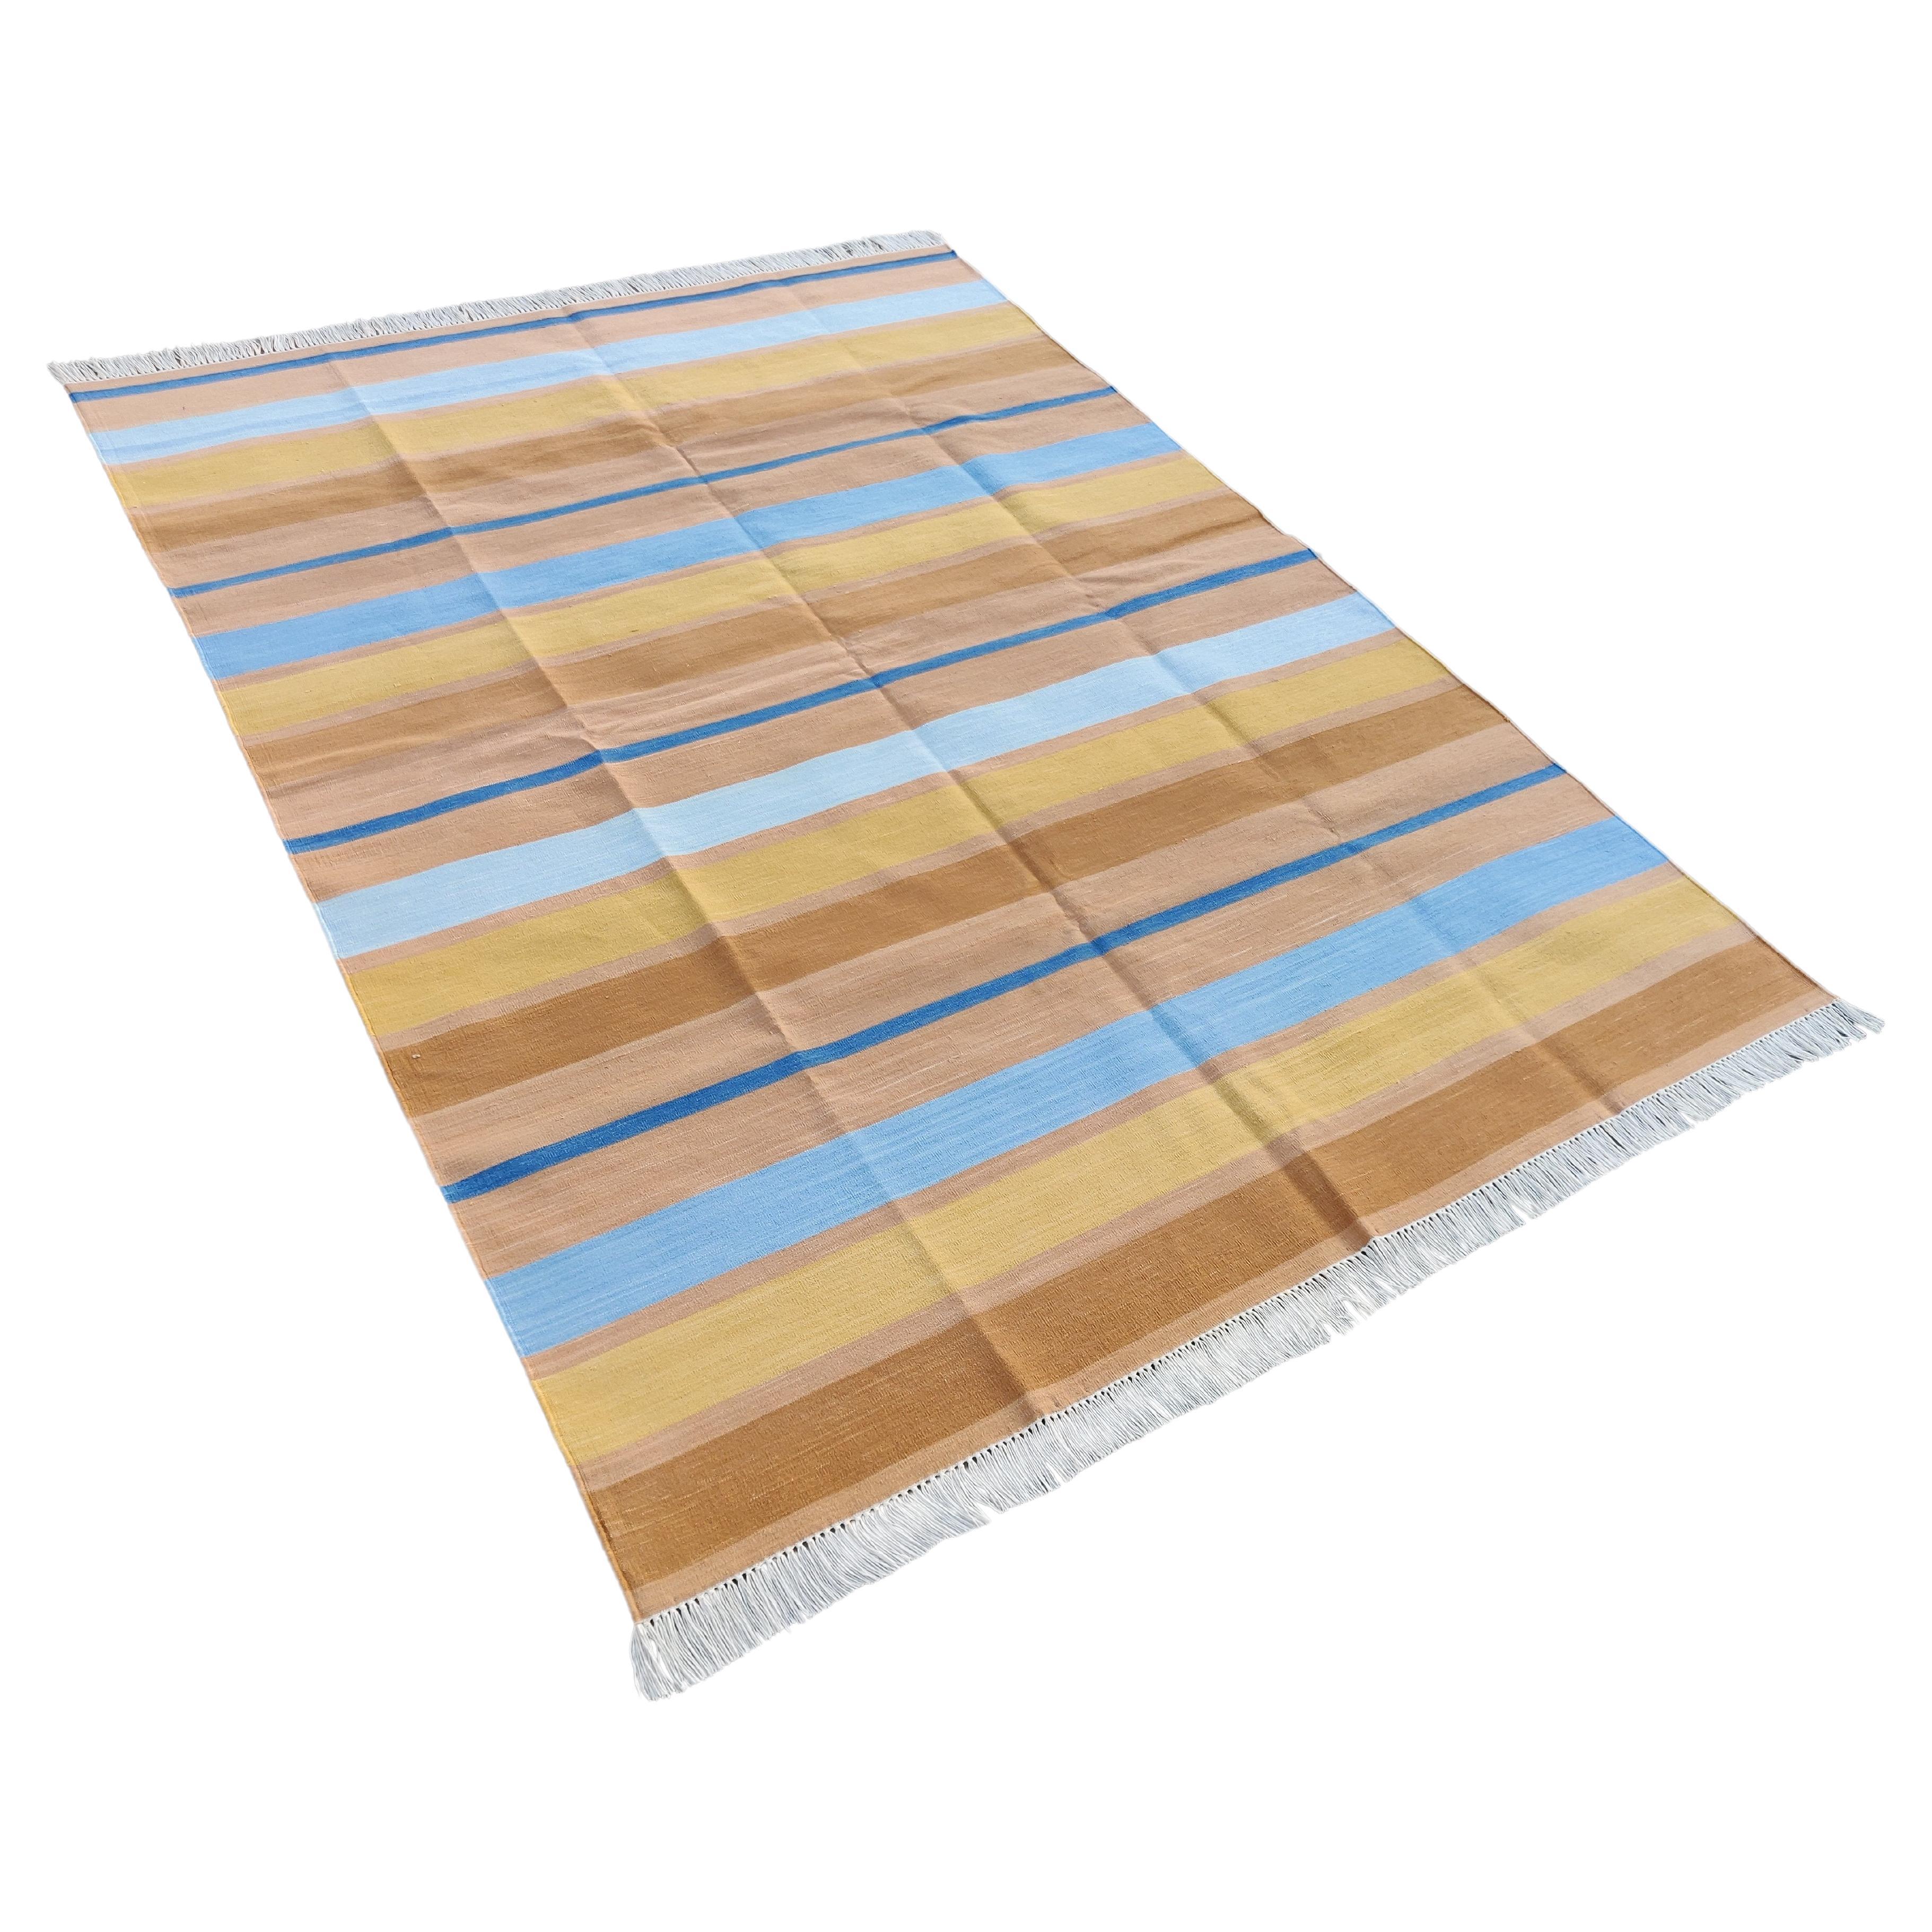 Handmade Cotton Area Flat Weave Rug, 5x7 Tan And Blue Striped Indian Dhurrie Rug